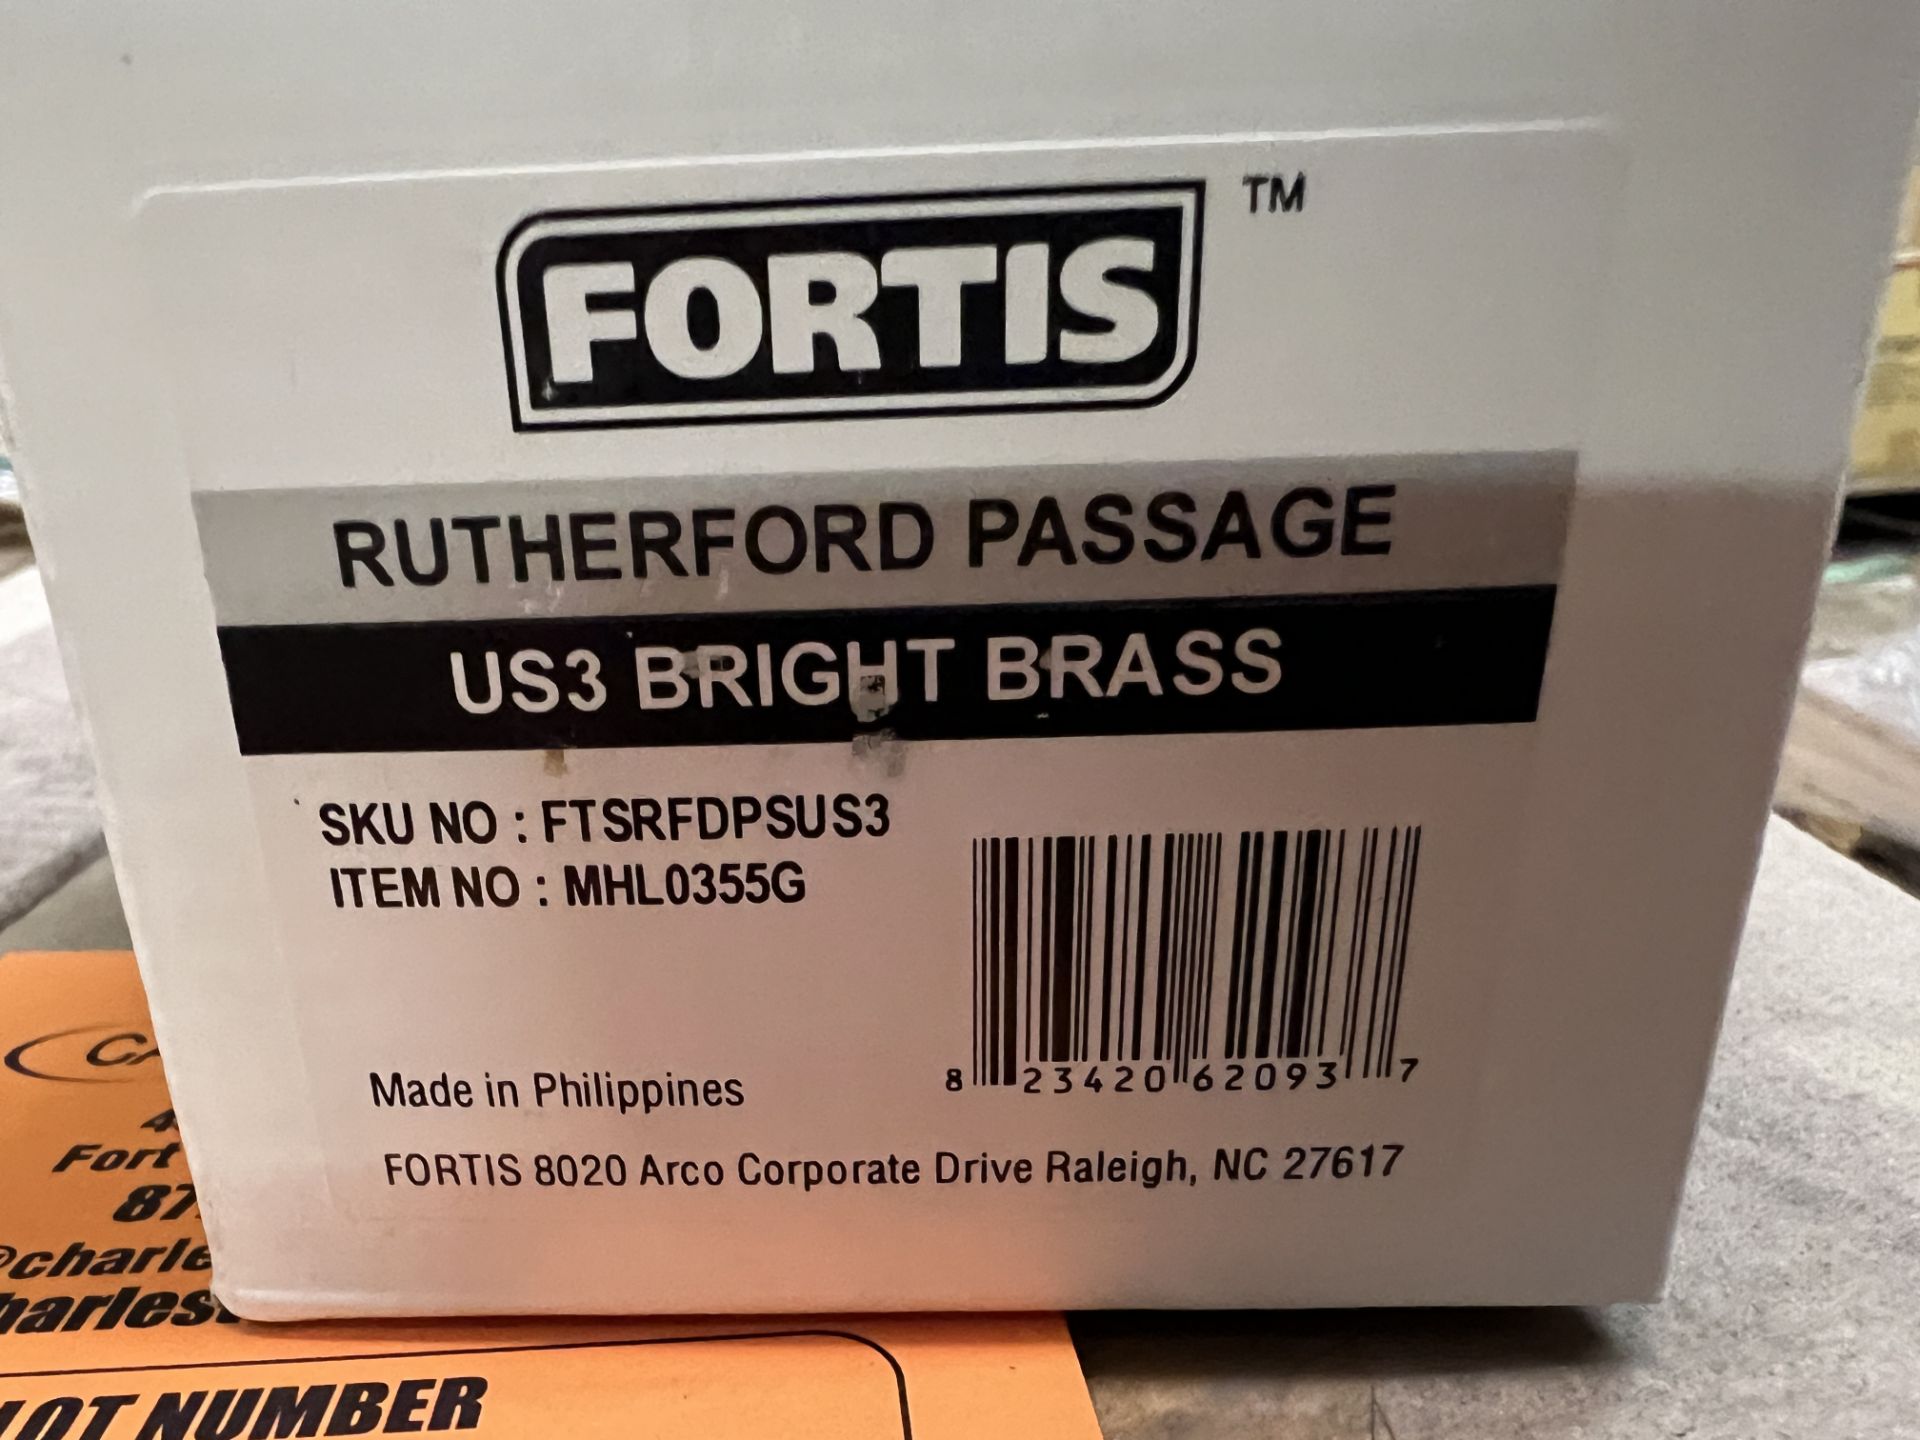 (20) FORTIS RUTHERFORD PASSAGE US3 BRIGHT BRASS